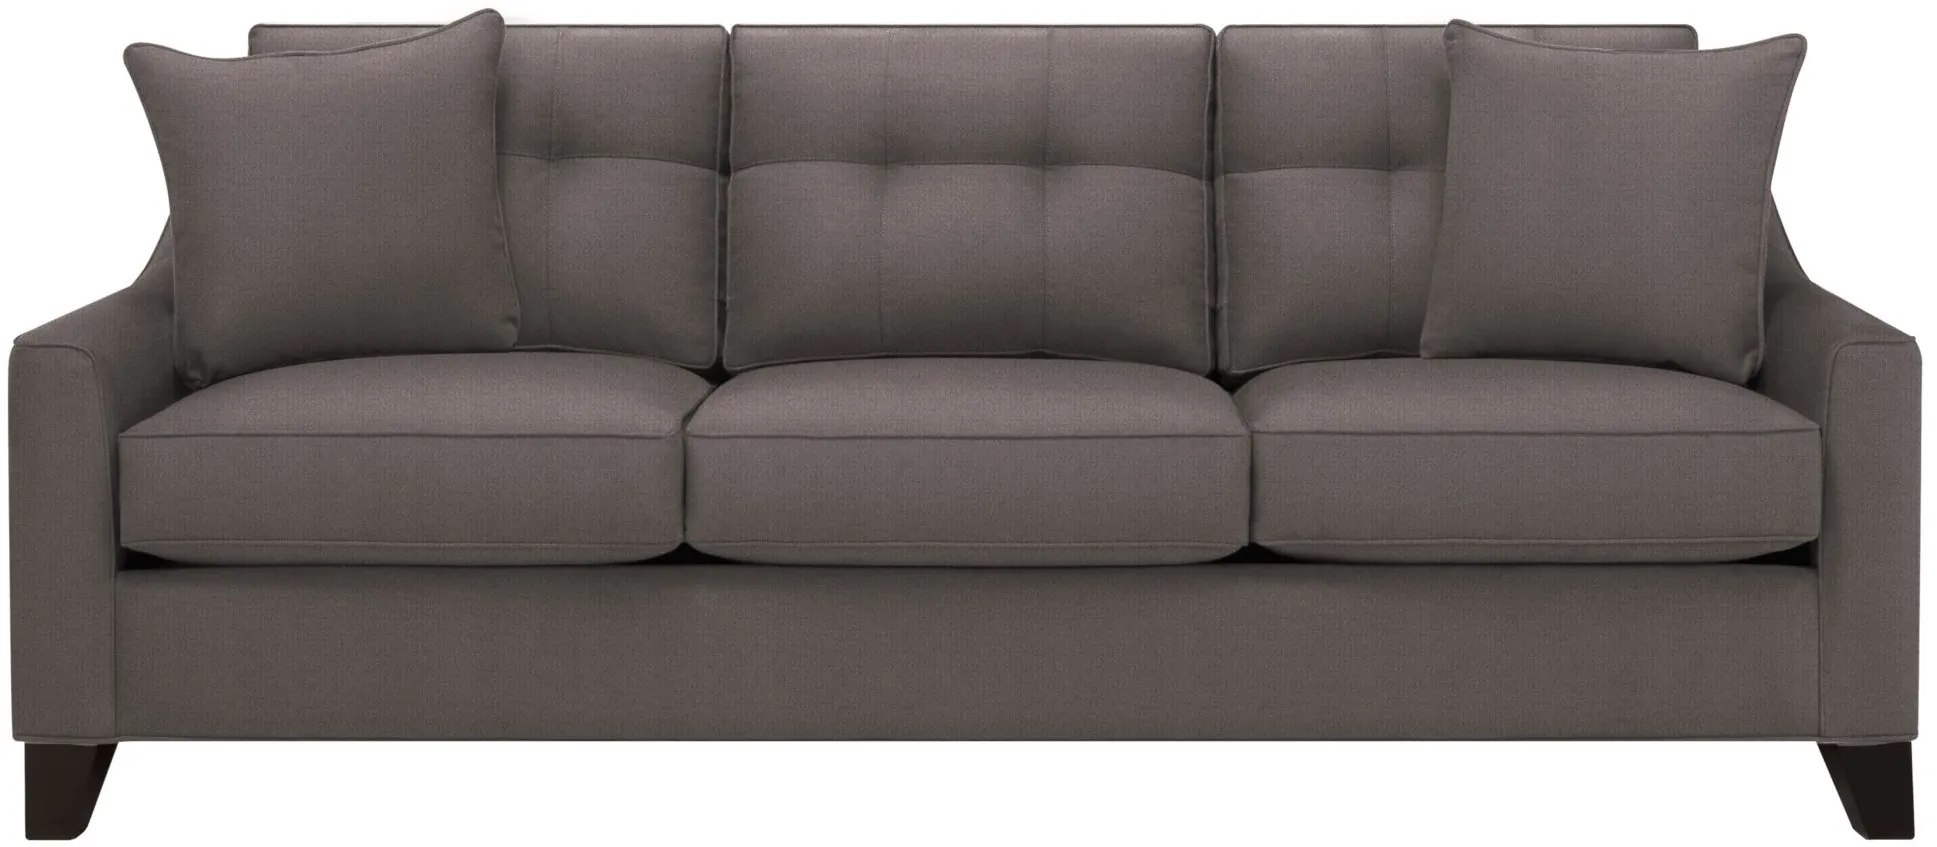 Carmine Sofa in Suede so Soft Slate by H.M. Richards